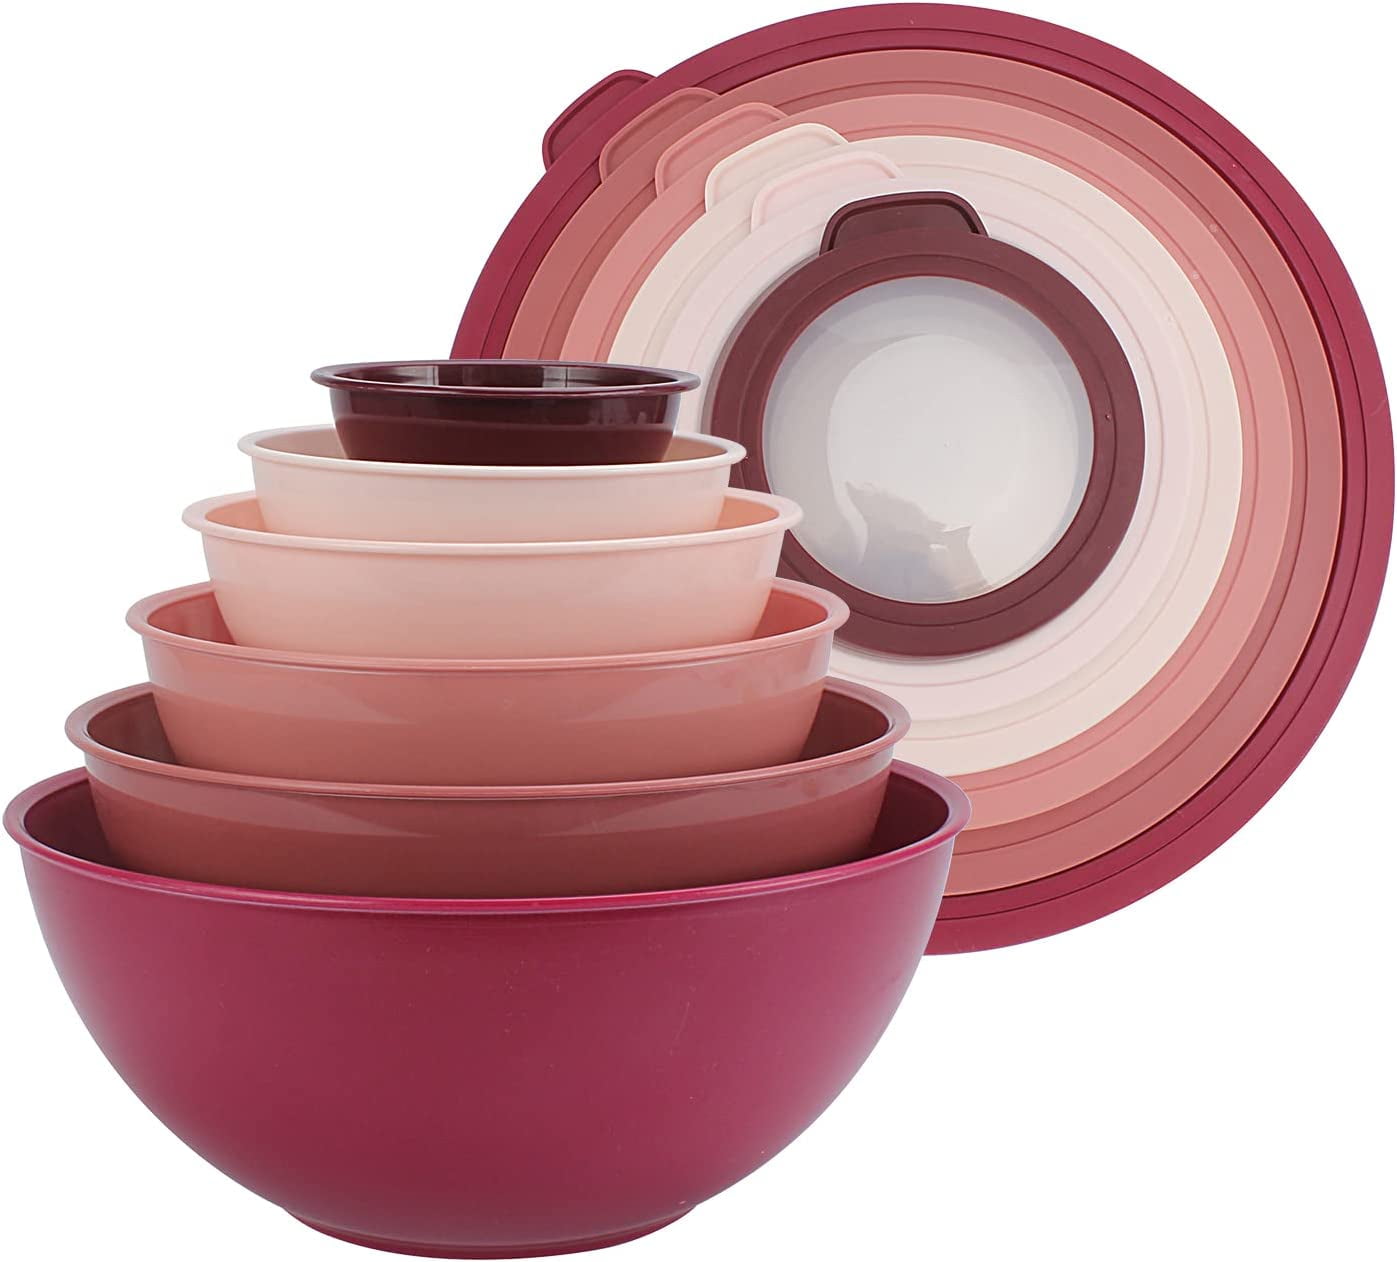 MegaChef 8-Piece Plastic Assorted Colors Mixing Bowl Set with Measuring Cups  985111721M - The Home Depot